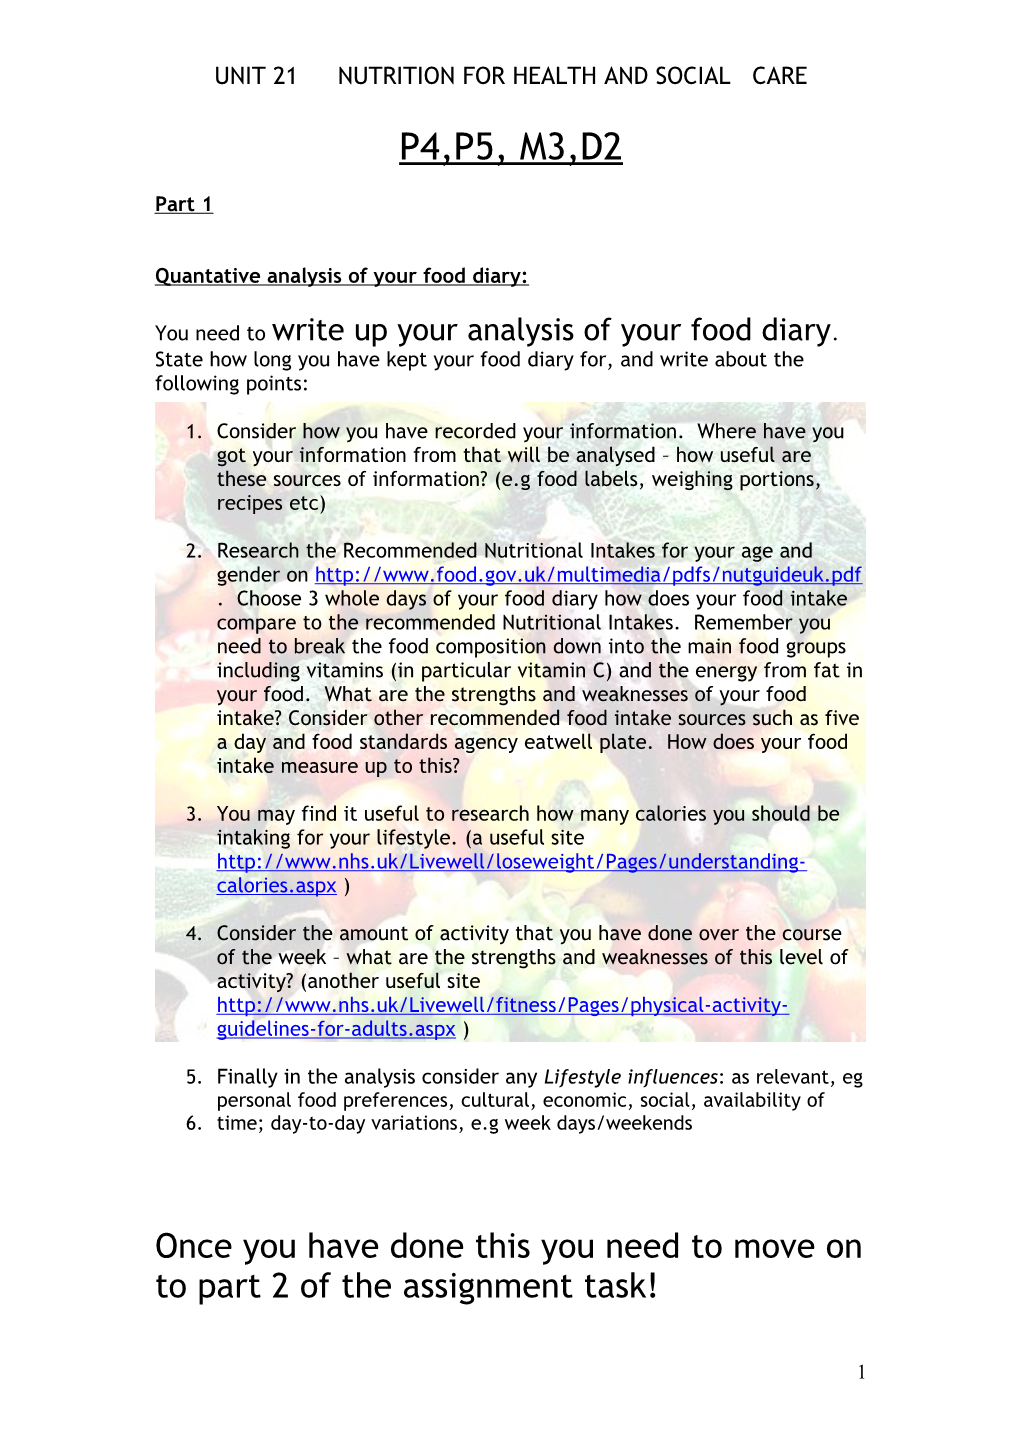 Quantative Analysis of Your Food Diary